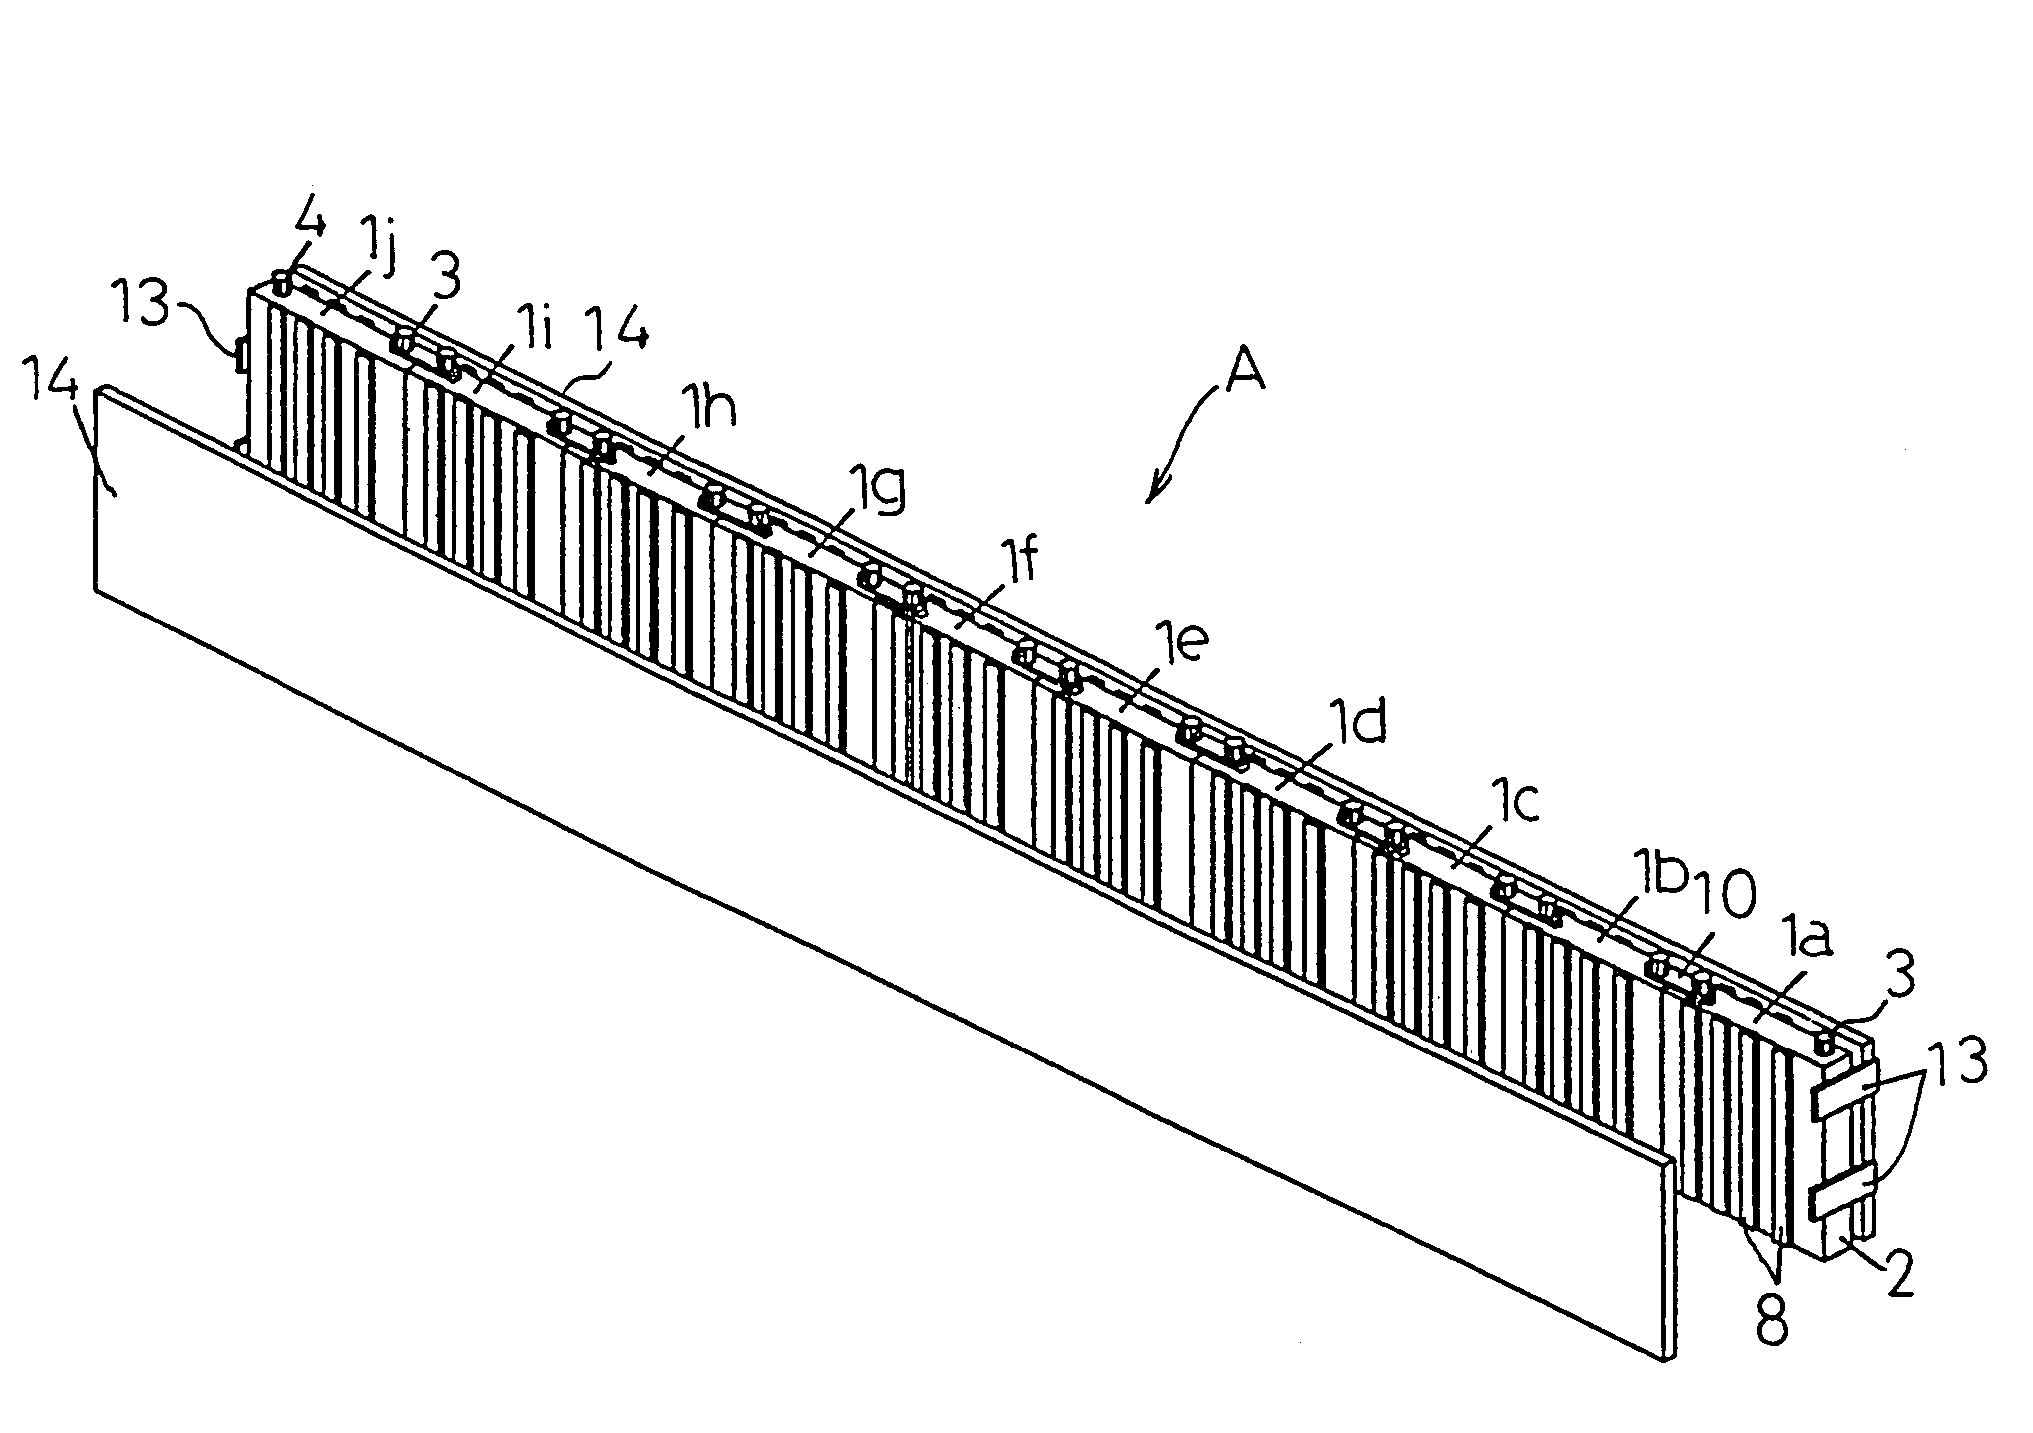 Battery pack with thermal distribution configuration